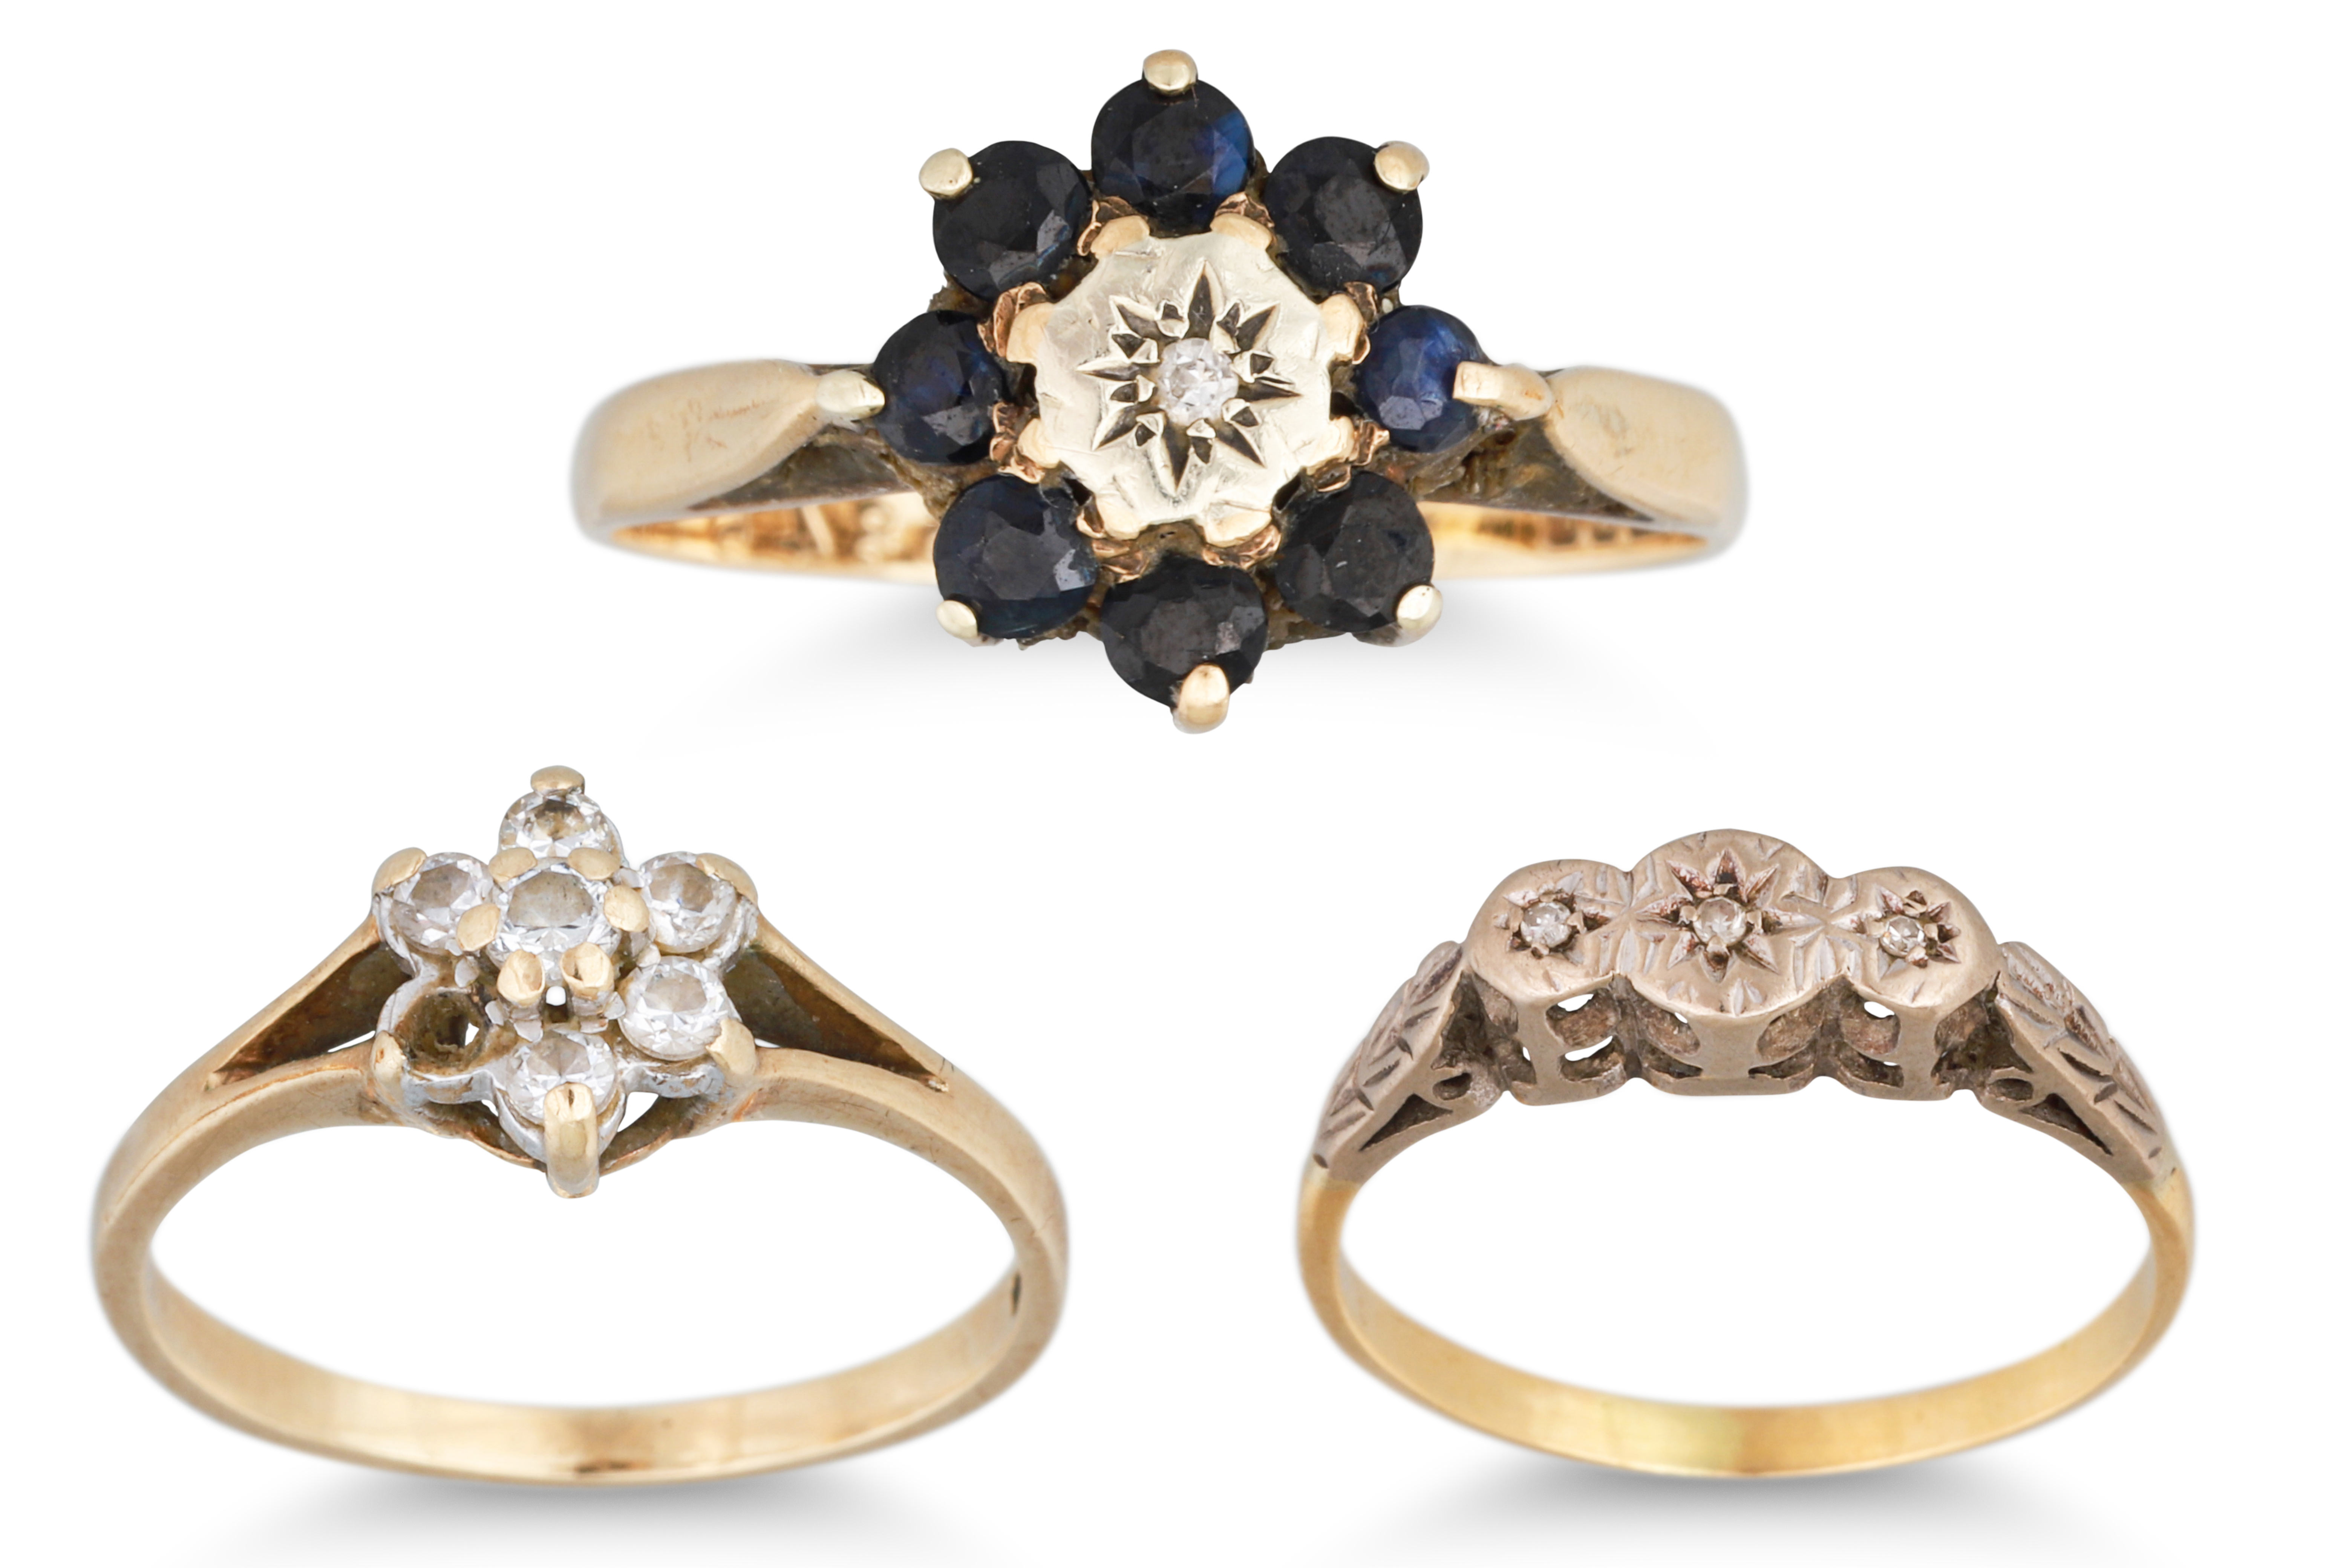 FIVE 9CT GOLD DRESS RINGS, 10.2 g. - Image 4 of 4